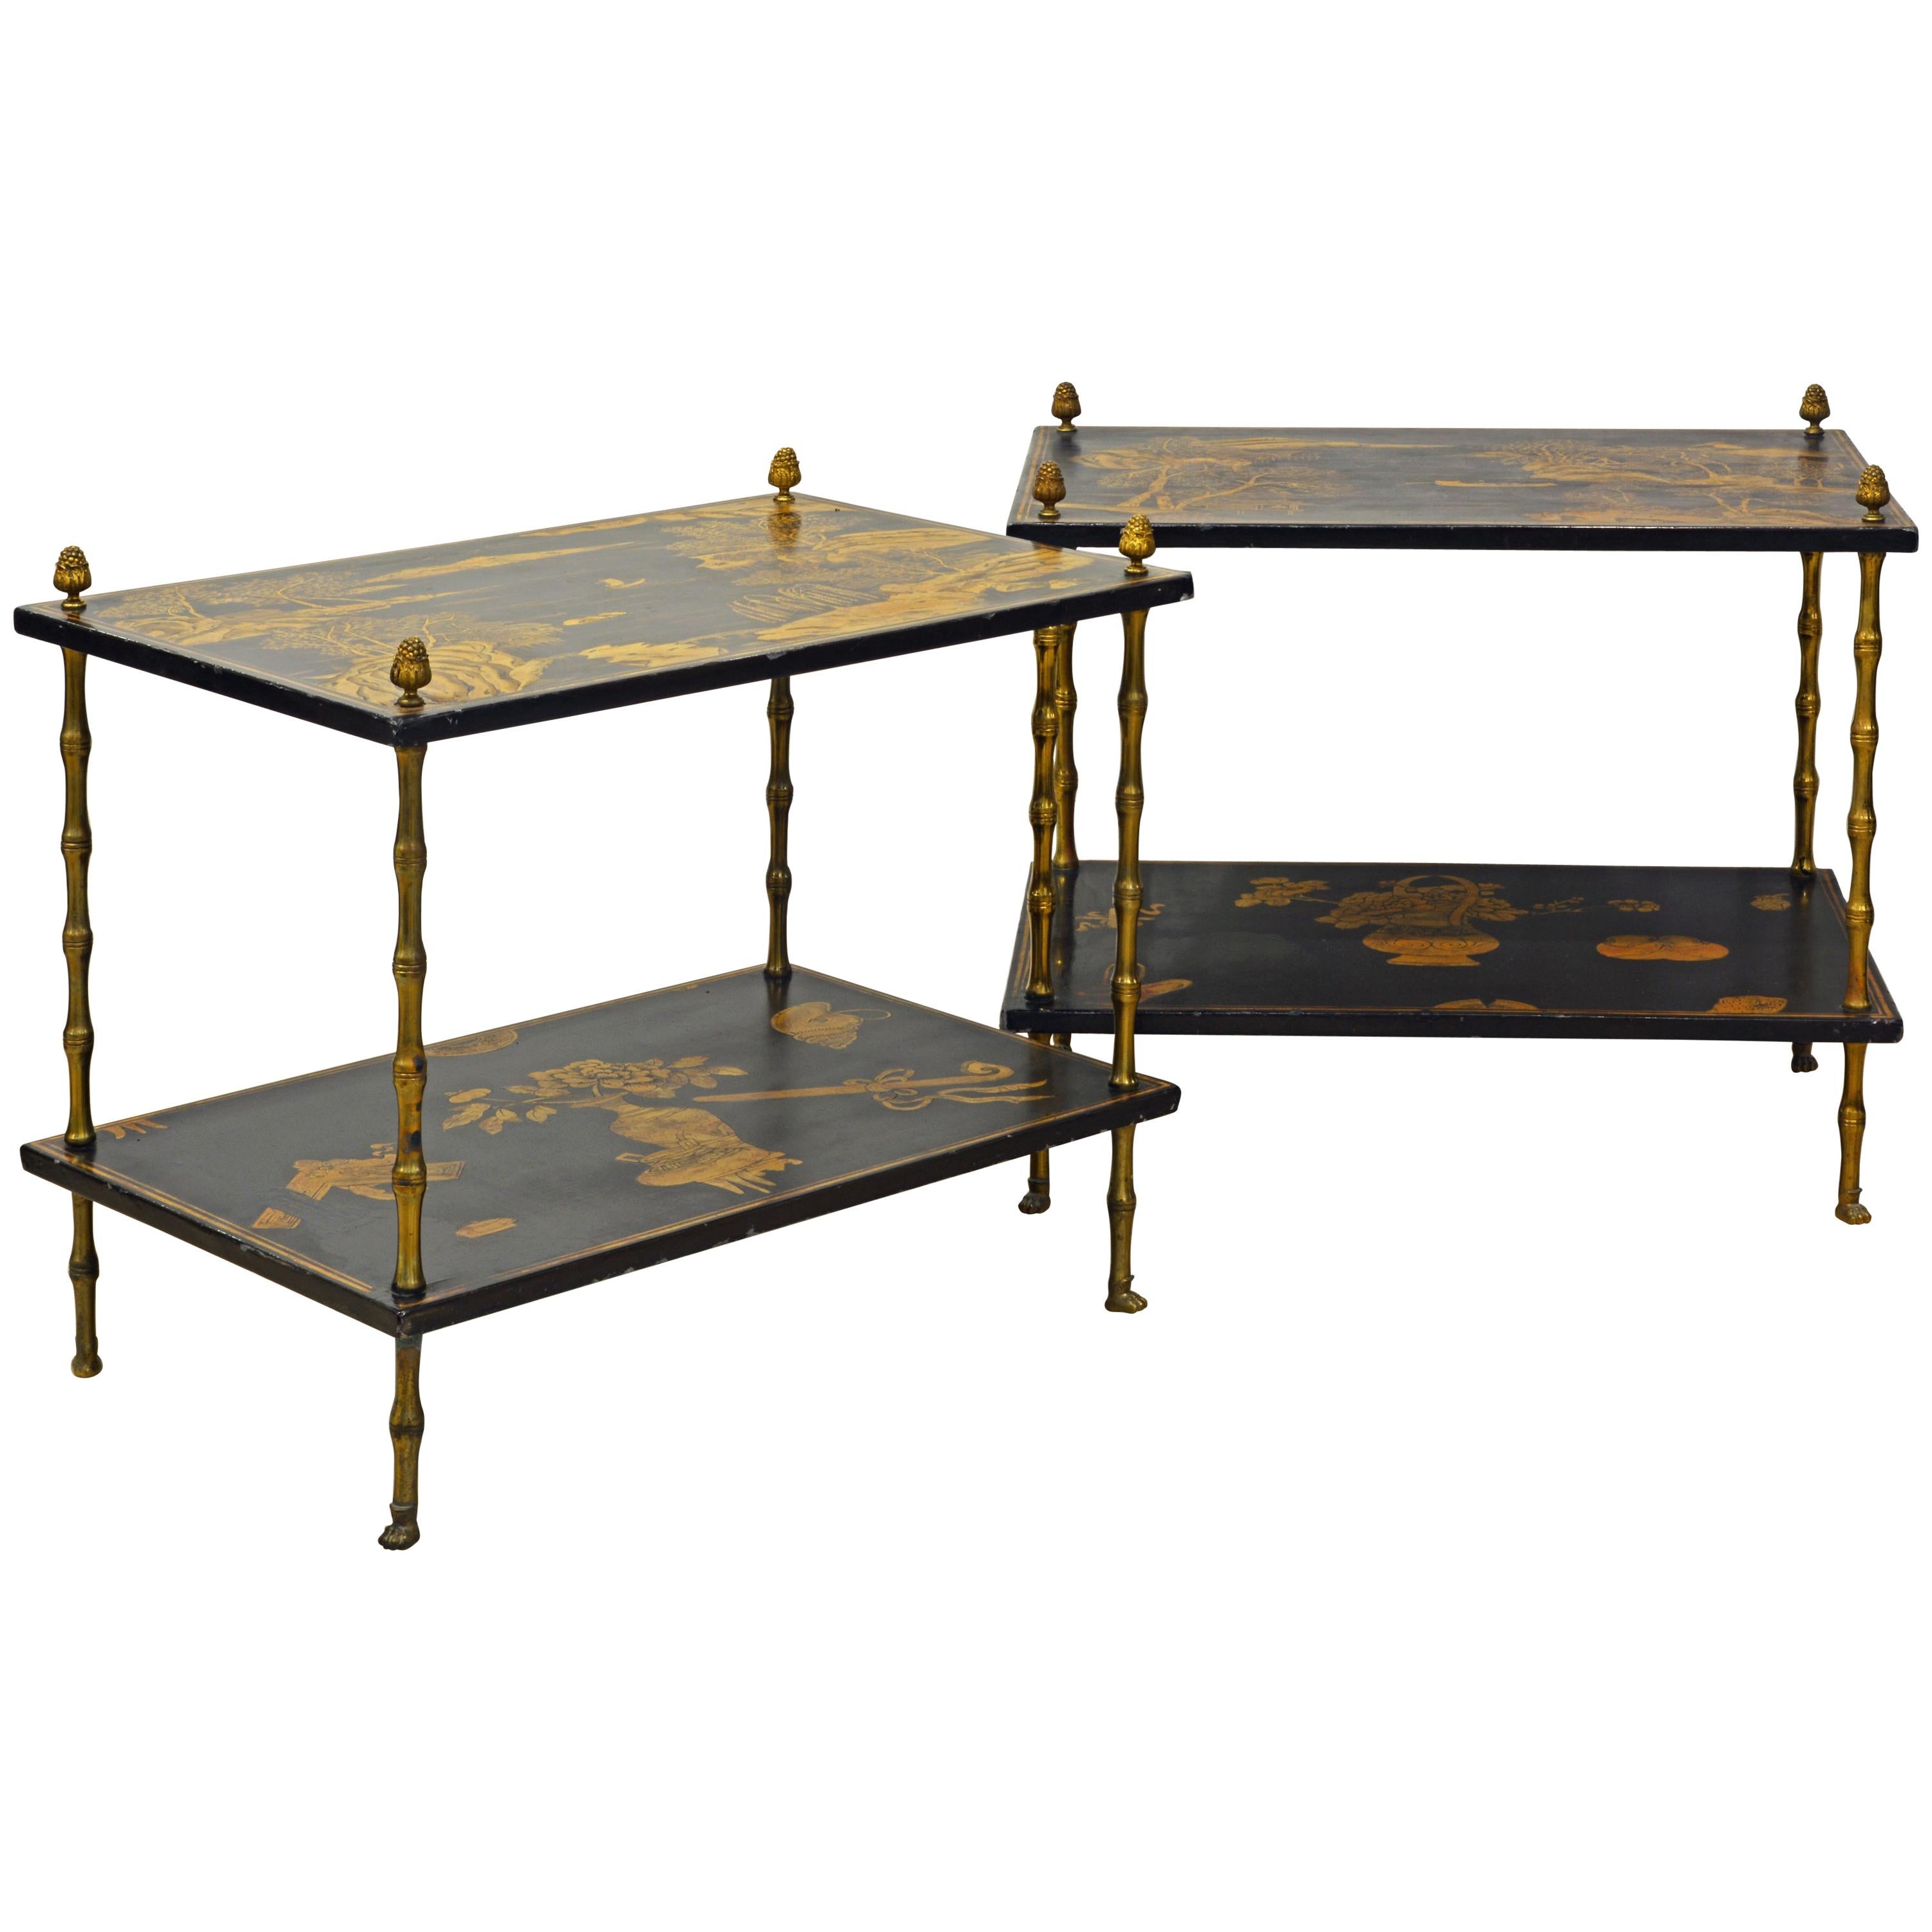 Pair of 19th Century English Aesthetic Movement Chinoiserie Two Tier Side Tables